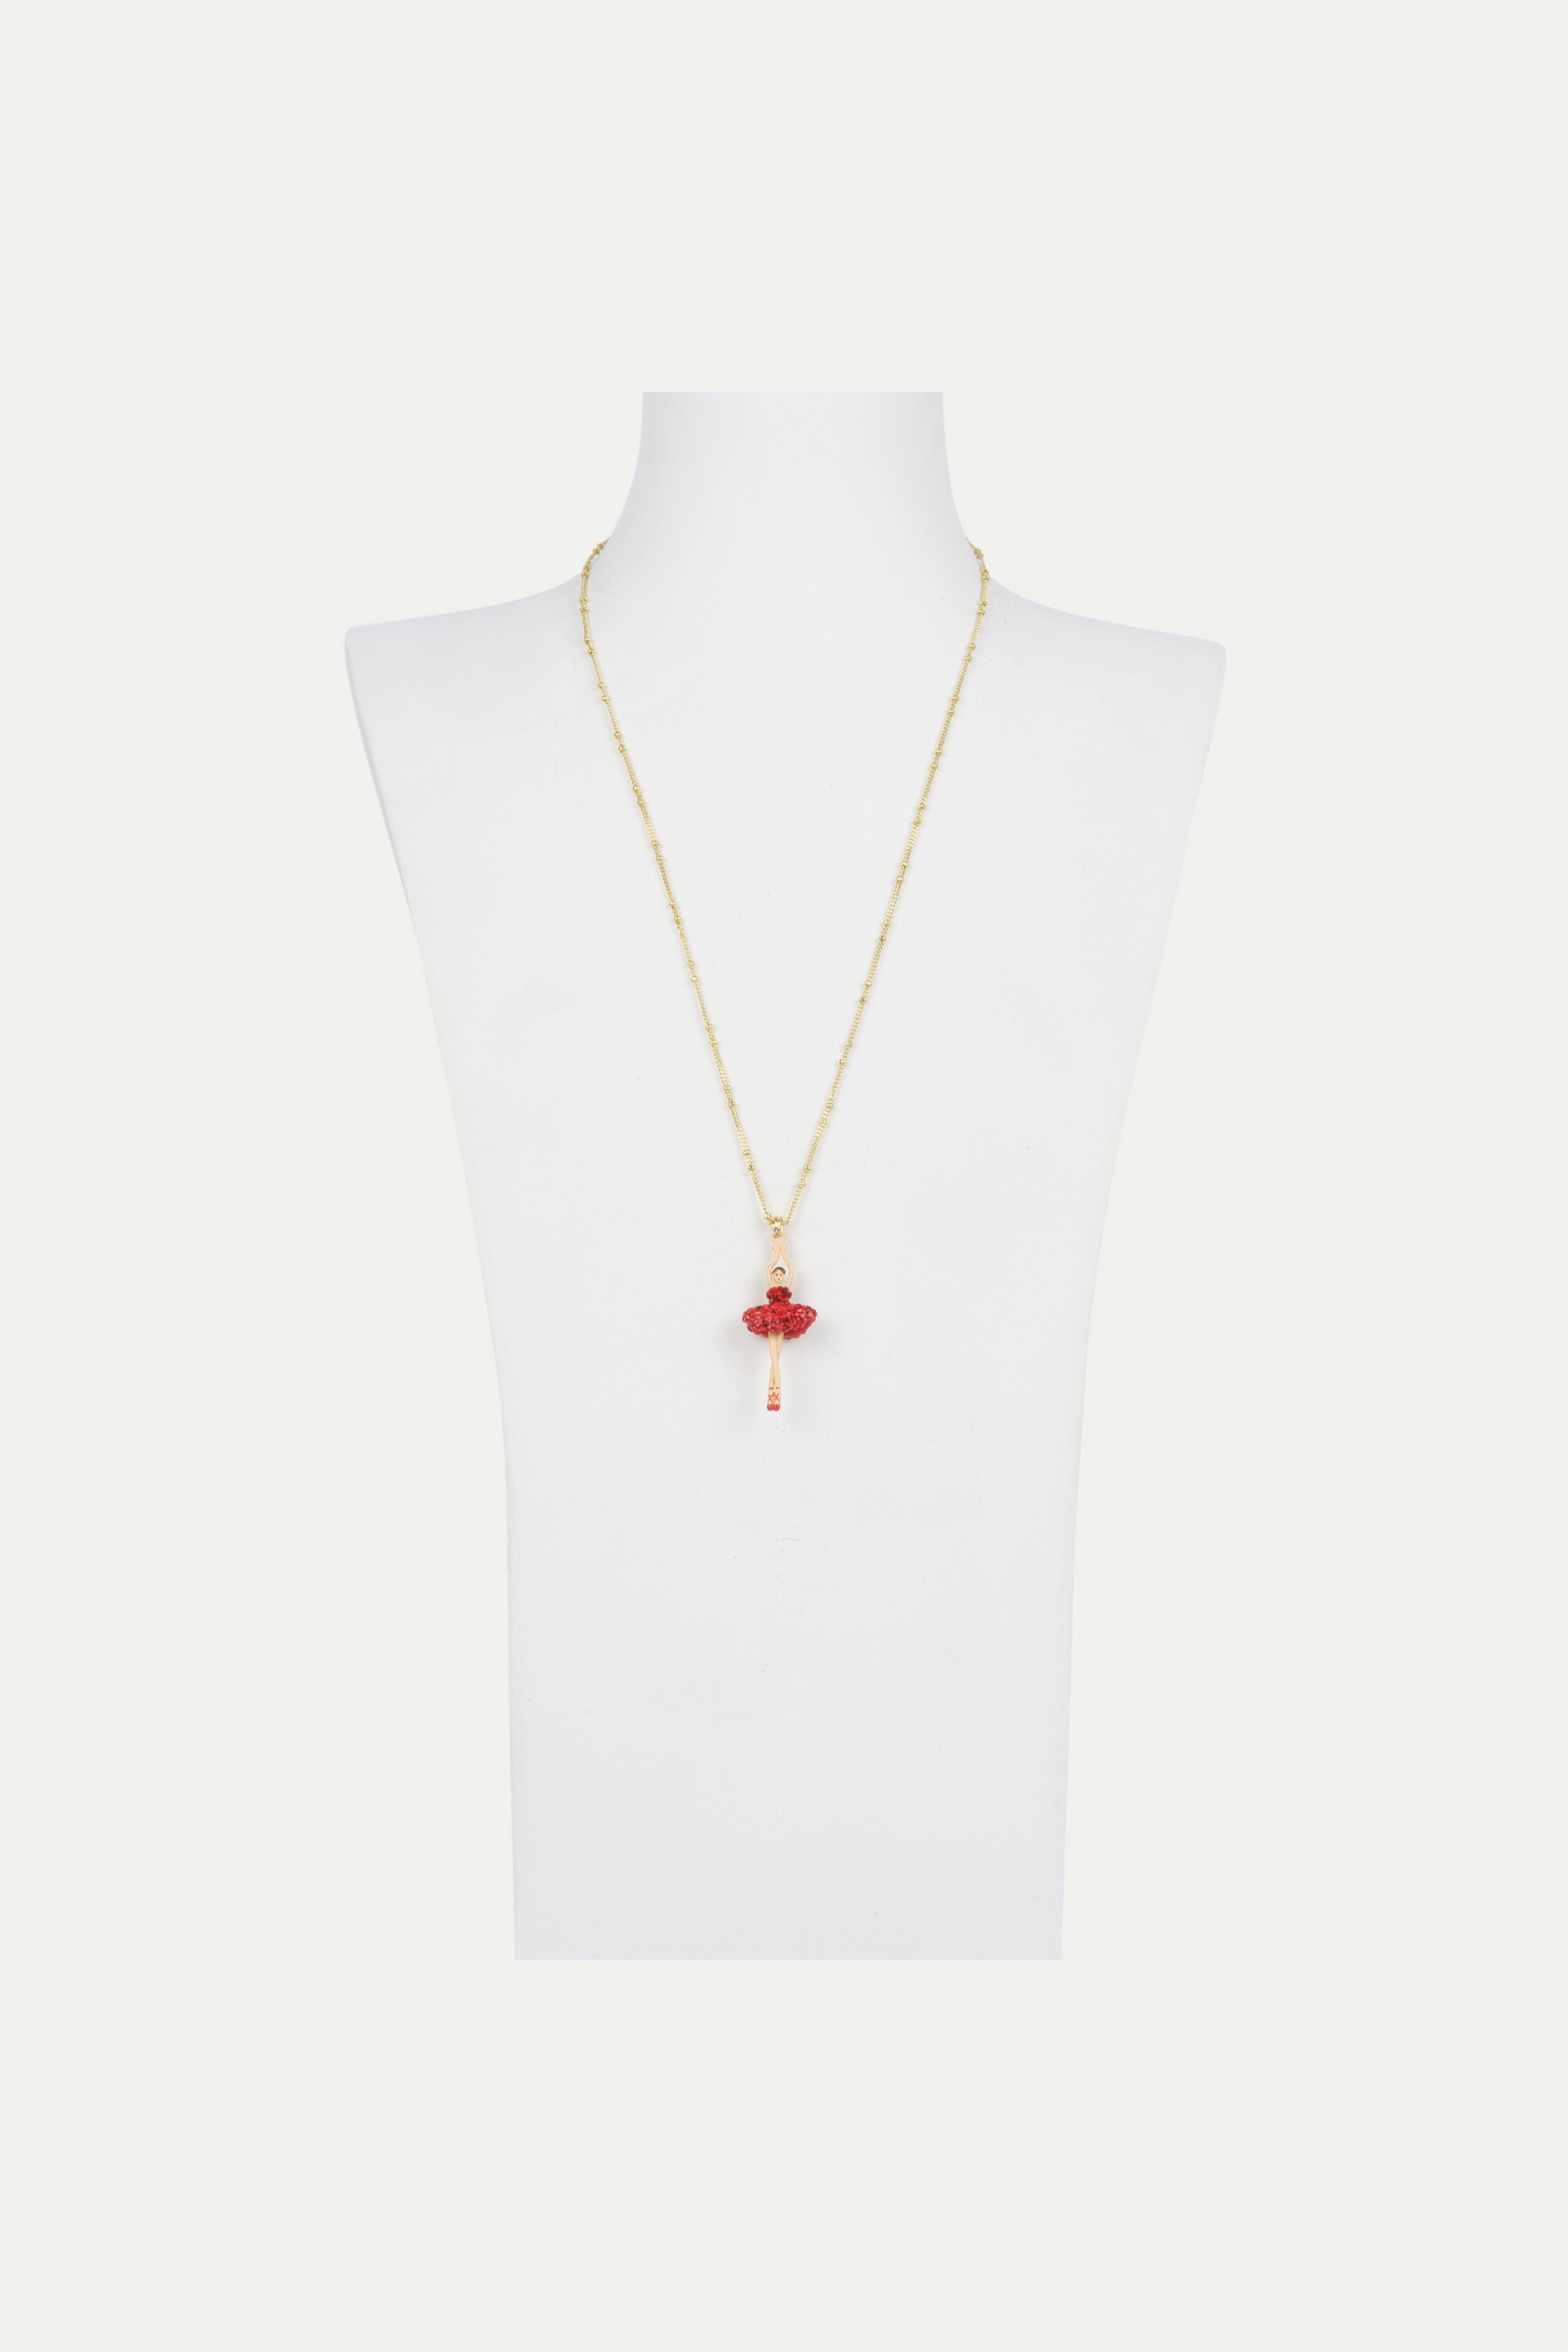 Necklace featuring ballerina with tutu paved with red rhinestone